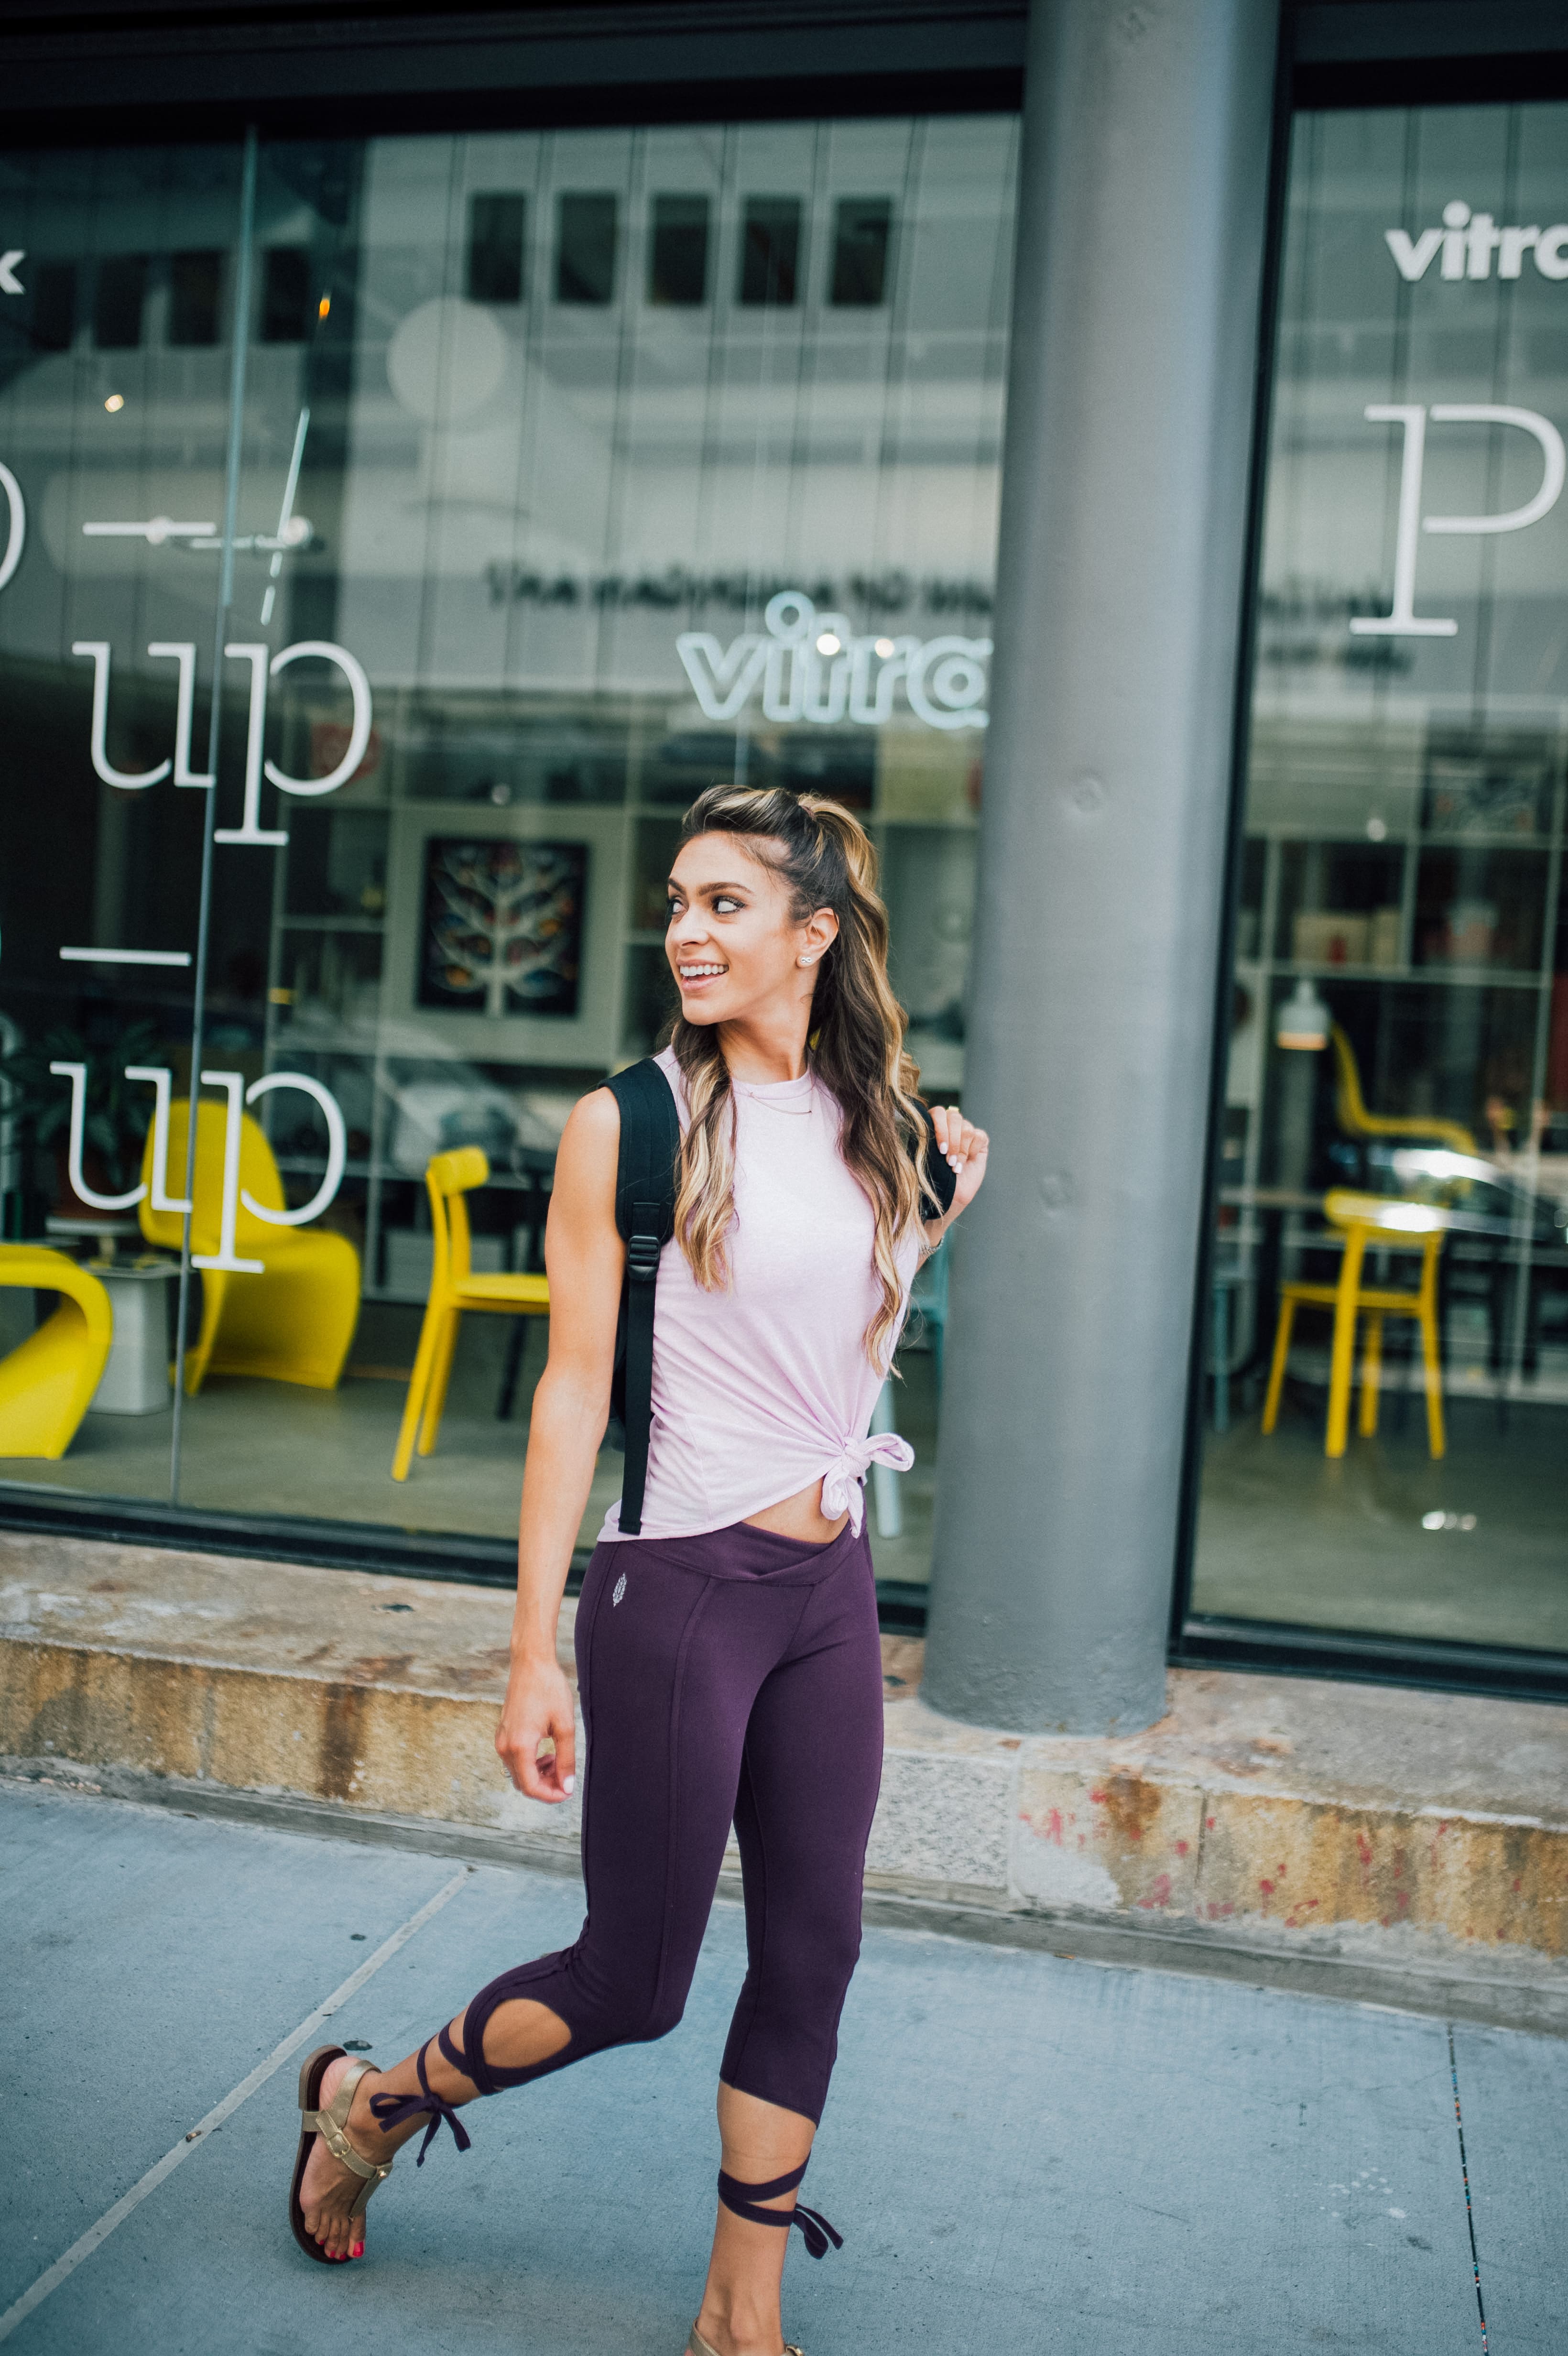 Free People fpMovement The Strong Movement Strong Girl Ailis Garcia Target Activewear Collab New York Yoga Outlet fit blogger 23